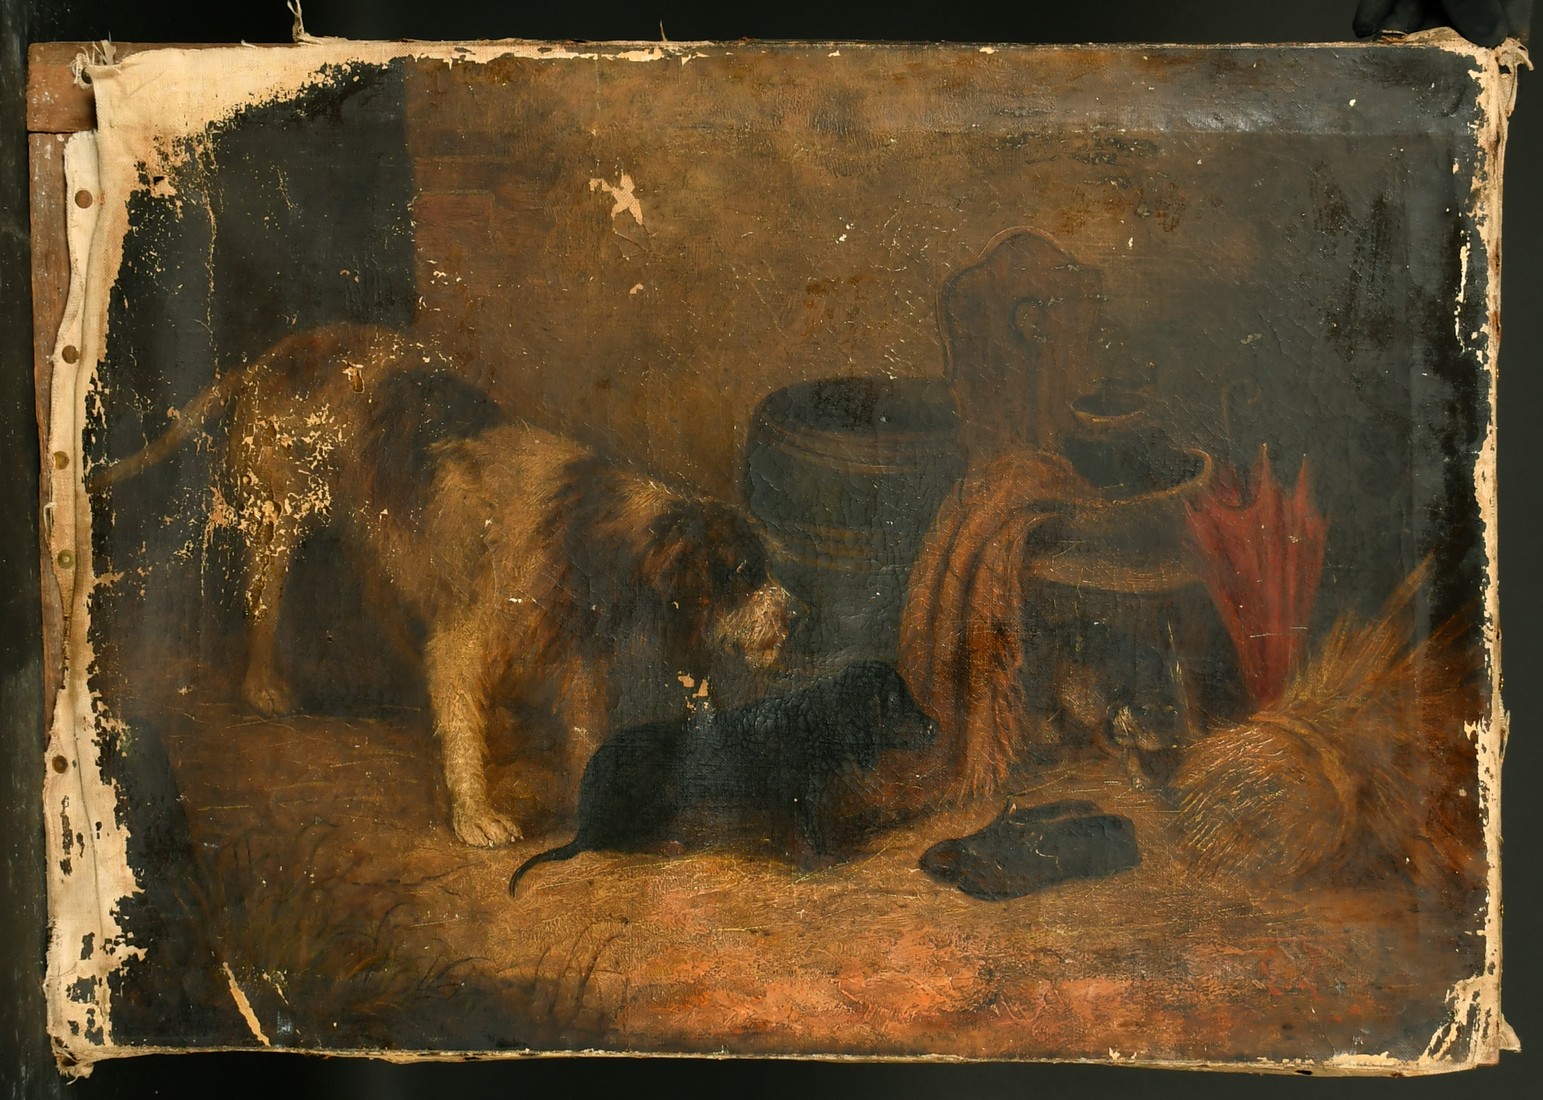 19th Century English School, a scene of dogs in a barn interior, oil on canvas, indistinctly signed, - Image 2 of 4